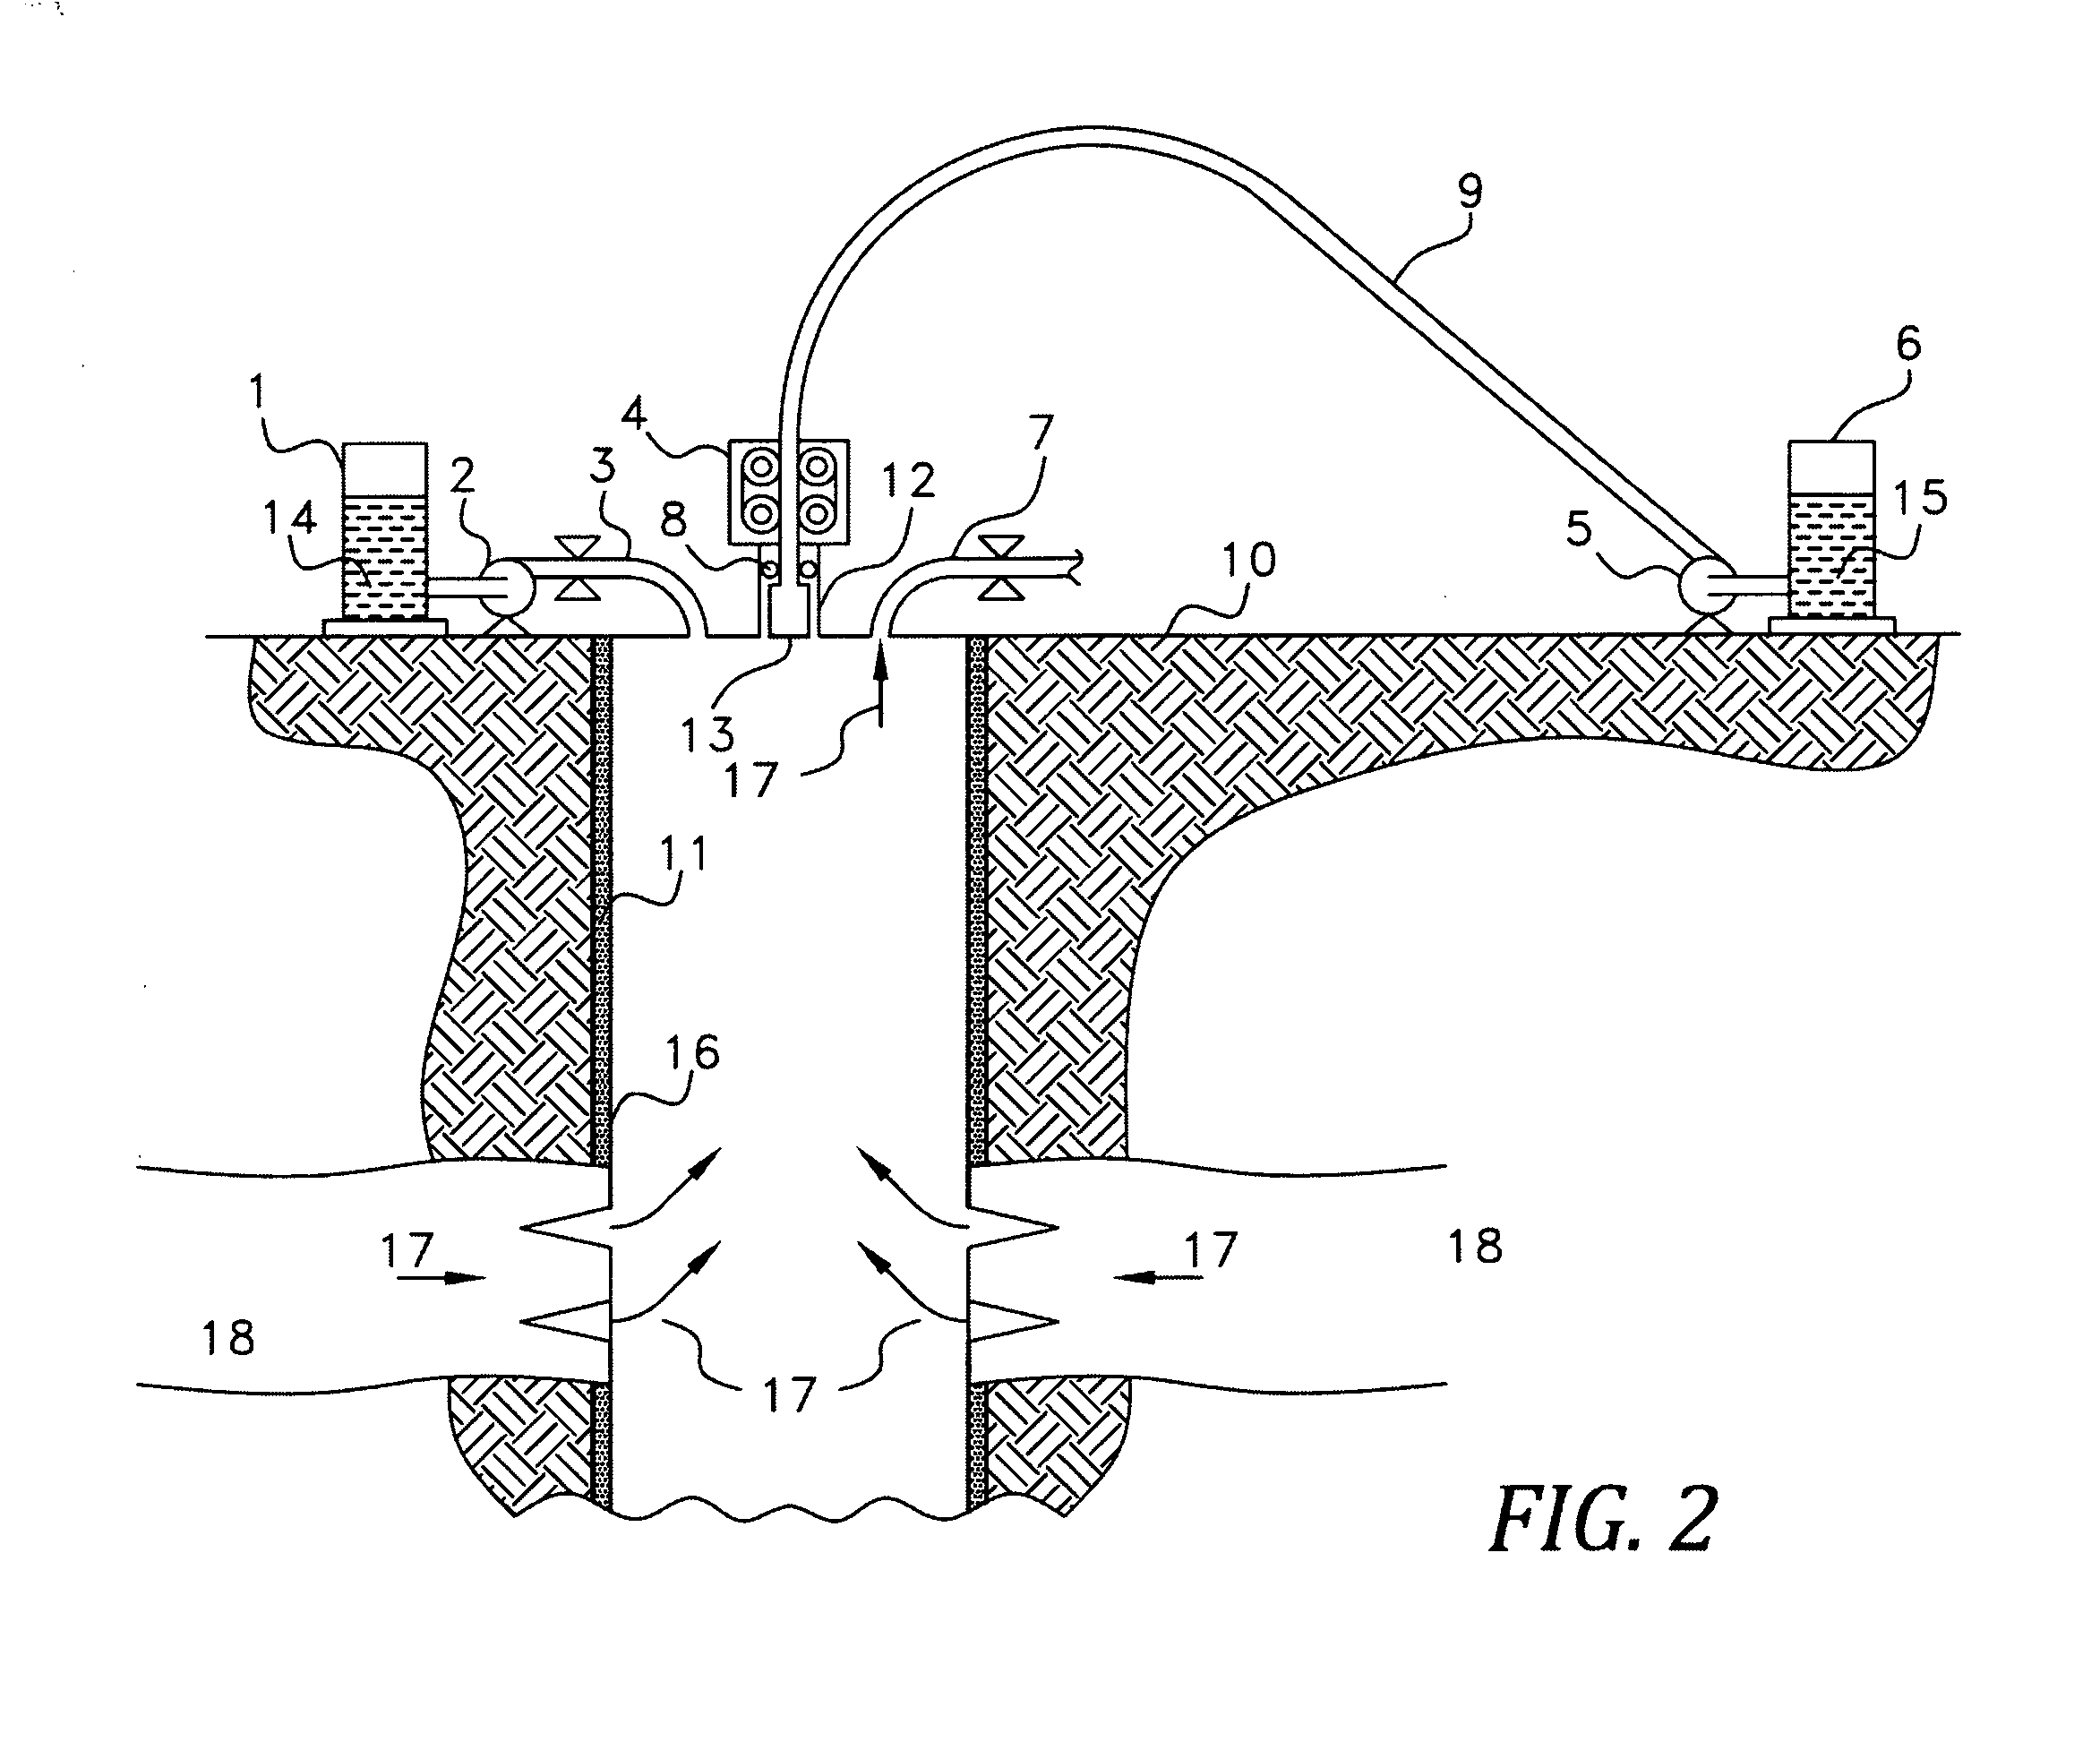 Method, apparatus and composition to increase recovery of hydrocarbons by reaction of selective oxidizers and fuels in the subterranean environment